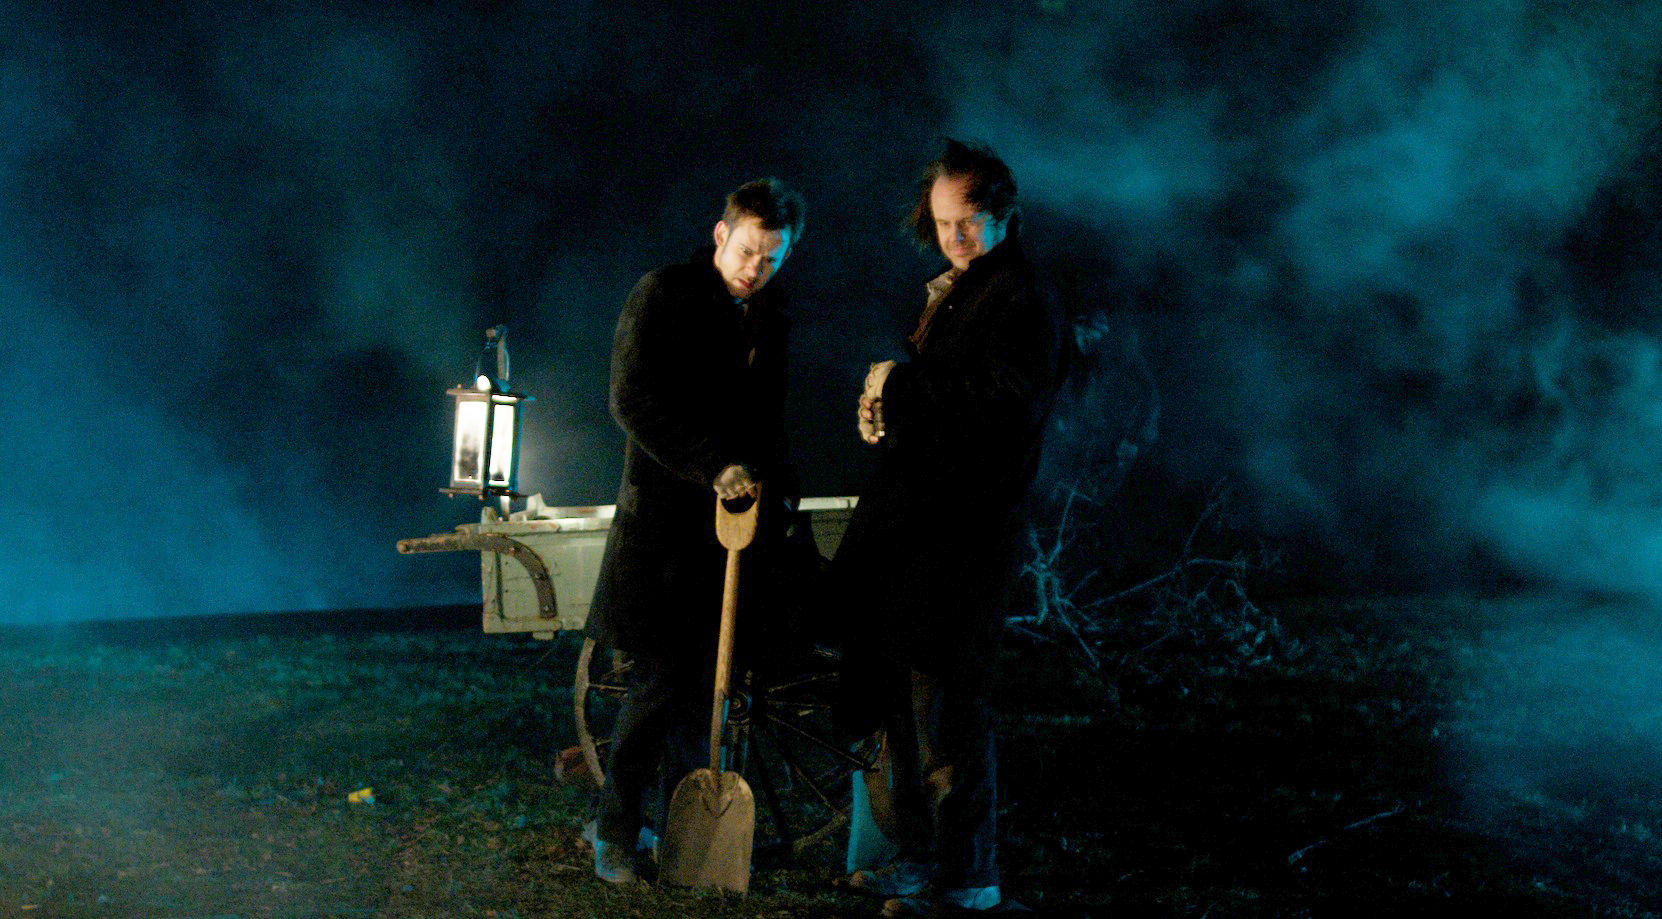 Dominic Monaghan stars as Arthur Blake and Larry Fessenden stars as Willie Grimes in IFC Films' I Sell the Dead (2009)